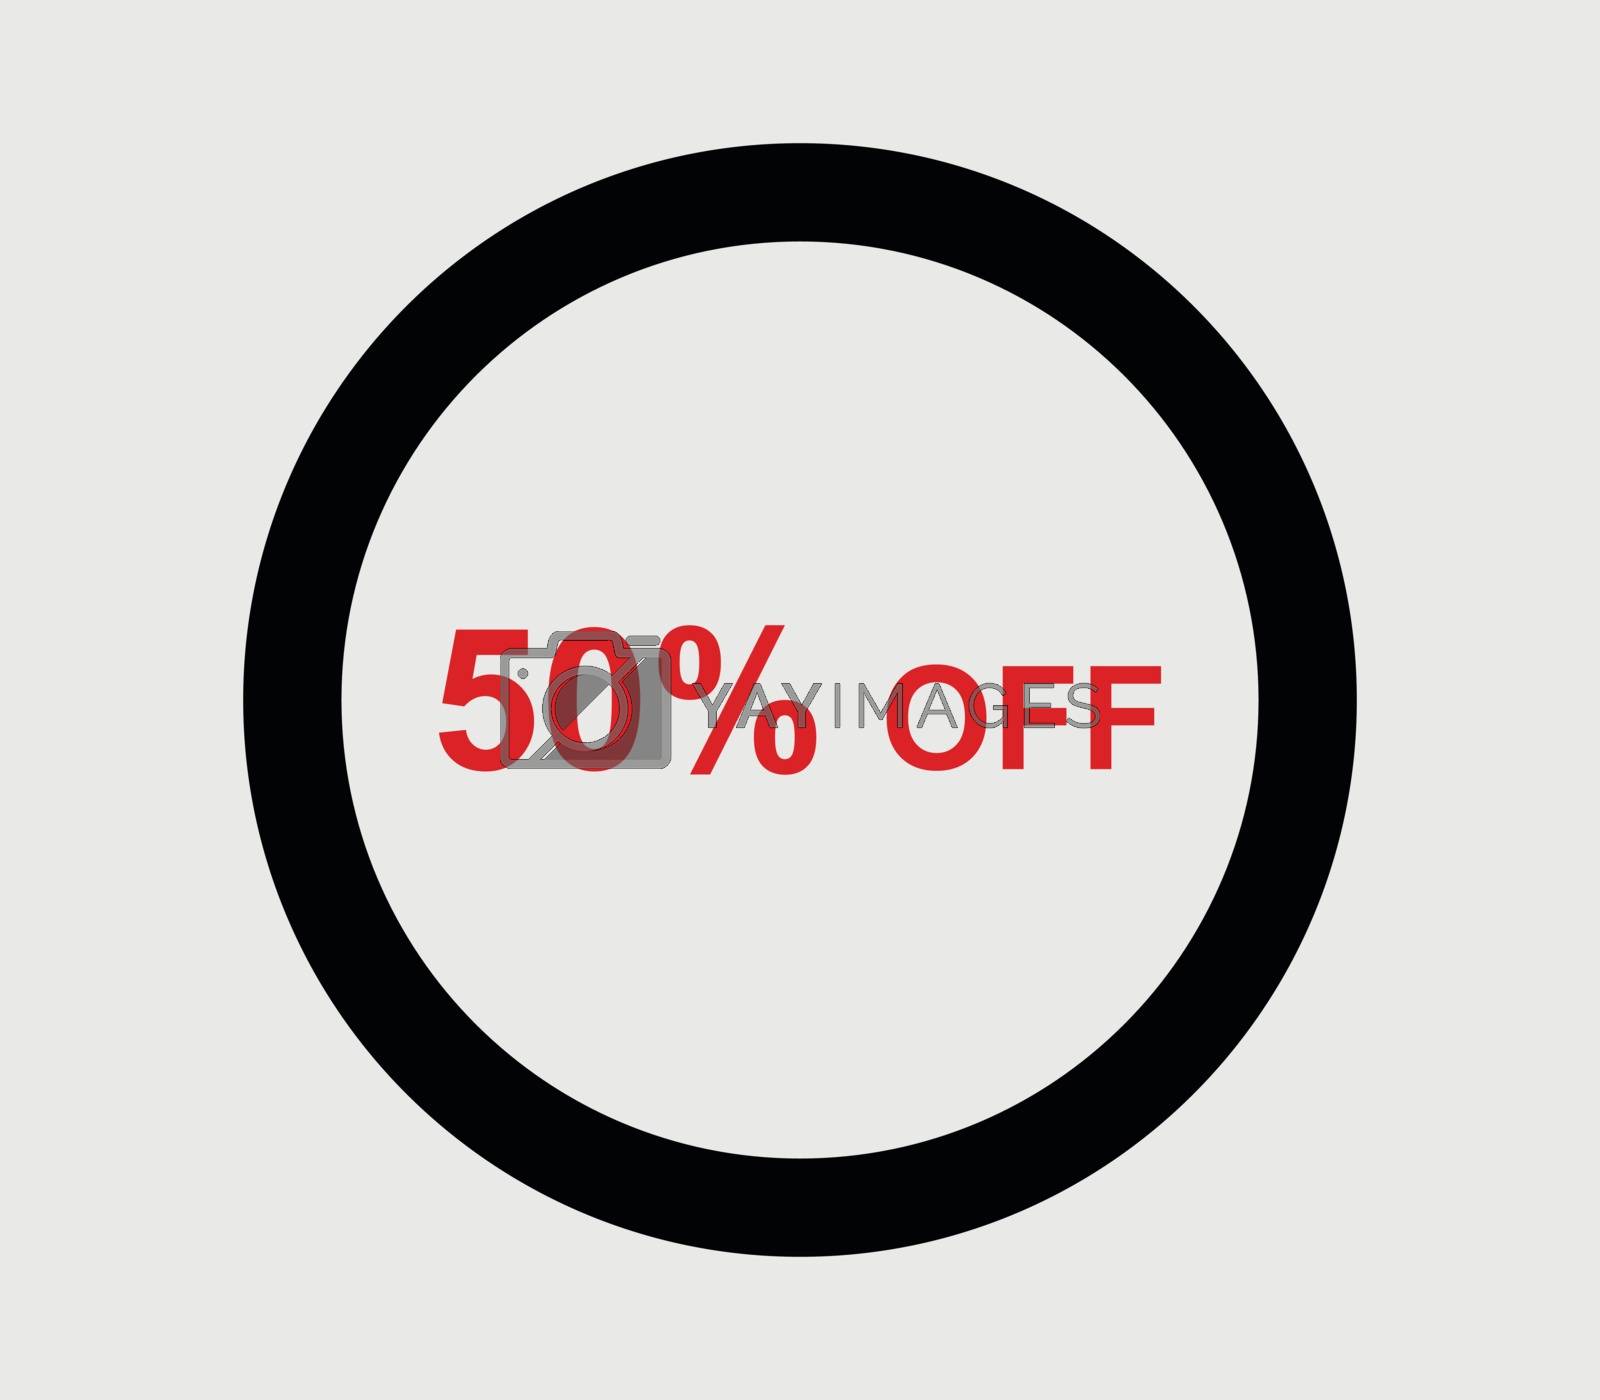 Royalty free image of icon 50% off by Mark1987